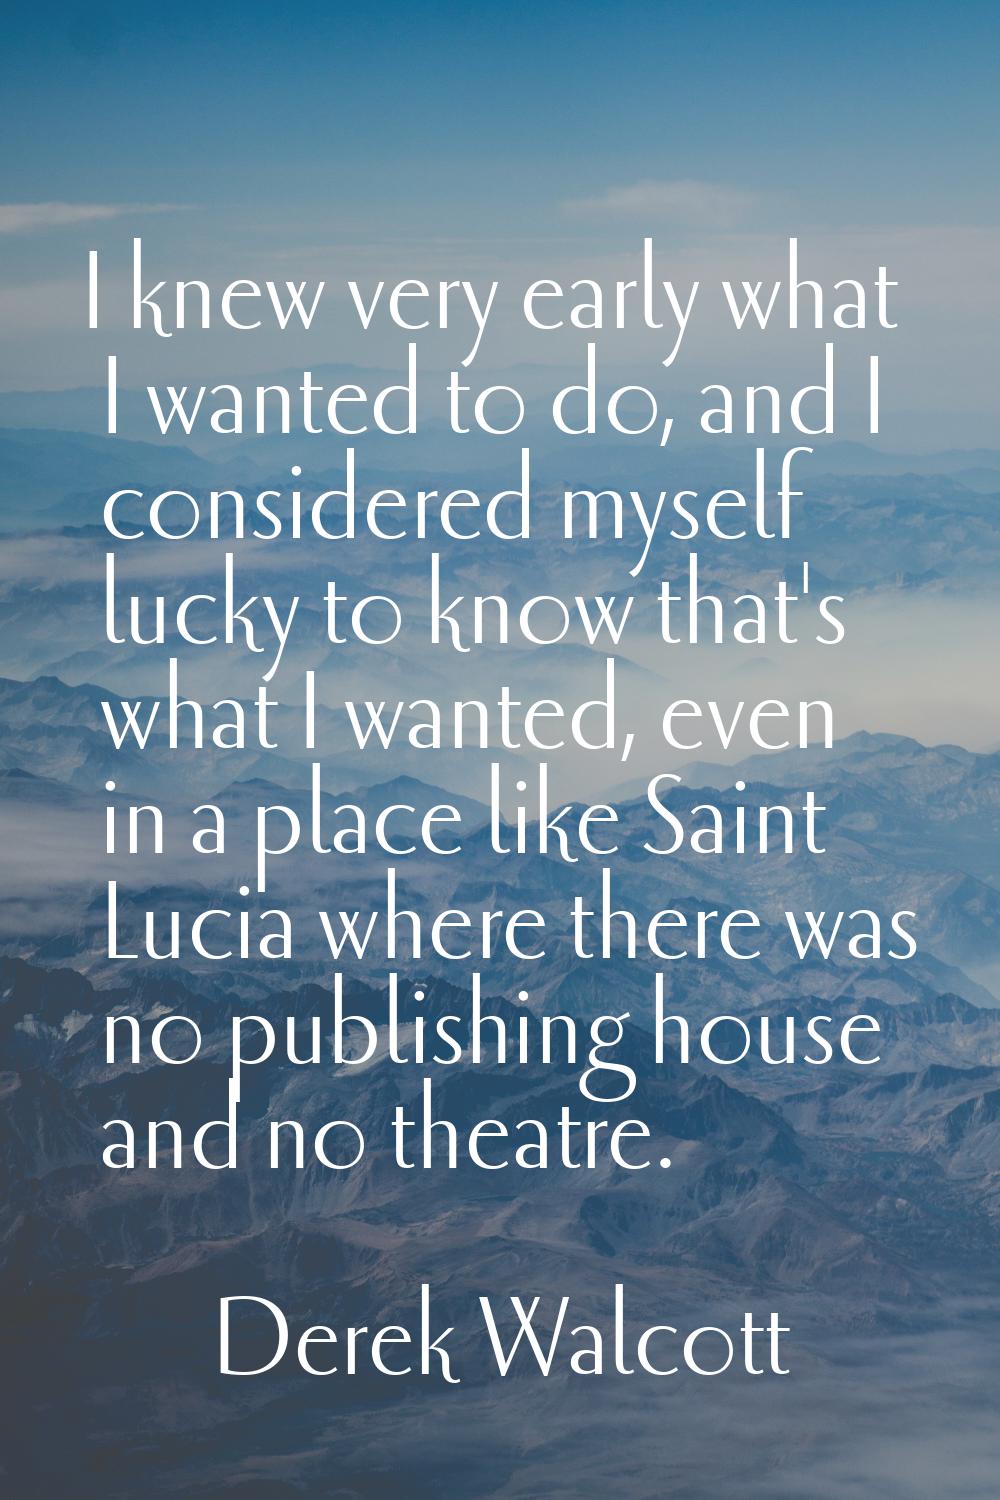 I knew very early what I wanted to do, and I considered myself lucky to know that's what I wanted, 